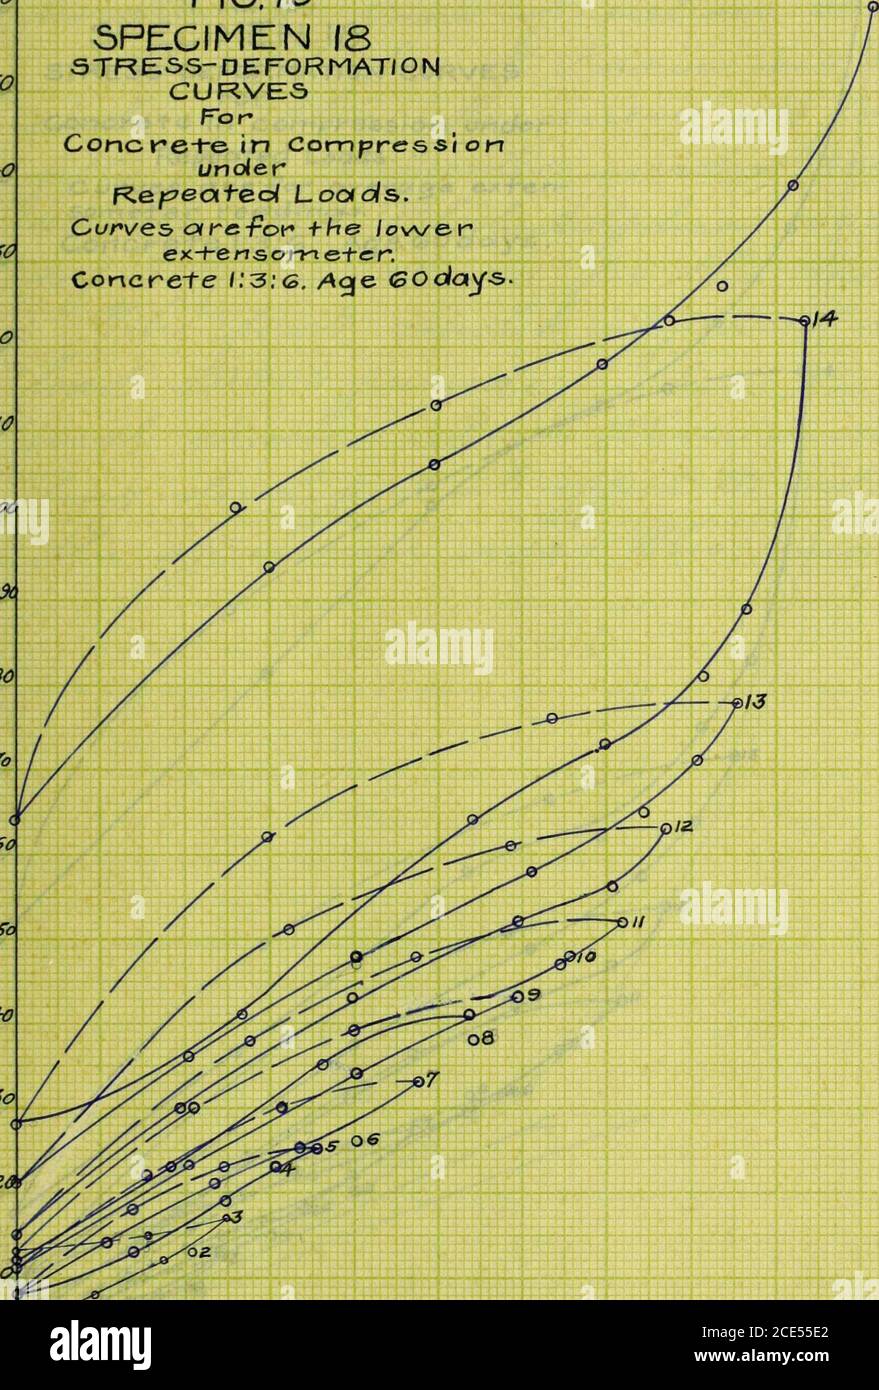 . Tests on coefficient of elasticity of plain concrete in compression and encased steel in tension . 27 FIG. J4.SPECIMEN 18. STRESS-DEFORMATION CURVES FOR PLAIN CONCRETE; JN COMPRESSION UNDER. REPEATED LEADINGS, UPPER EXTENSOMETER.Concrete ).3G Acj& 60 Day«5. /3 It, II IO 7 / v^ZV? ^ 75P&lt;? c^fi? Applied Iocra/ in pacsnols per square inch. 3 4Si £8 FG.5SPECIMEN 18 STRESS-DEFORMATIONCURVESFor Concrete in CompressionunderRepeated Looiols. Cwwes otrc-For* the lower ex+ensometcr.Concrete /.3:&lt;s. Age &lt;SOolay-s.. &lt;•? ioo 555 -ftfd 5w &lt;S. SPECIMEN 16. STRESS-DEFORMAT/ON CURVESFor Conc Stock Photo